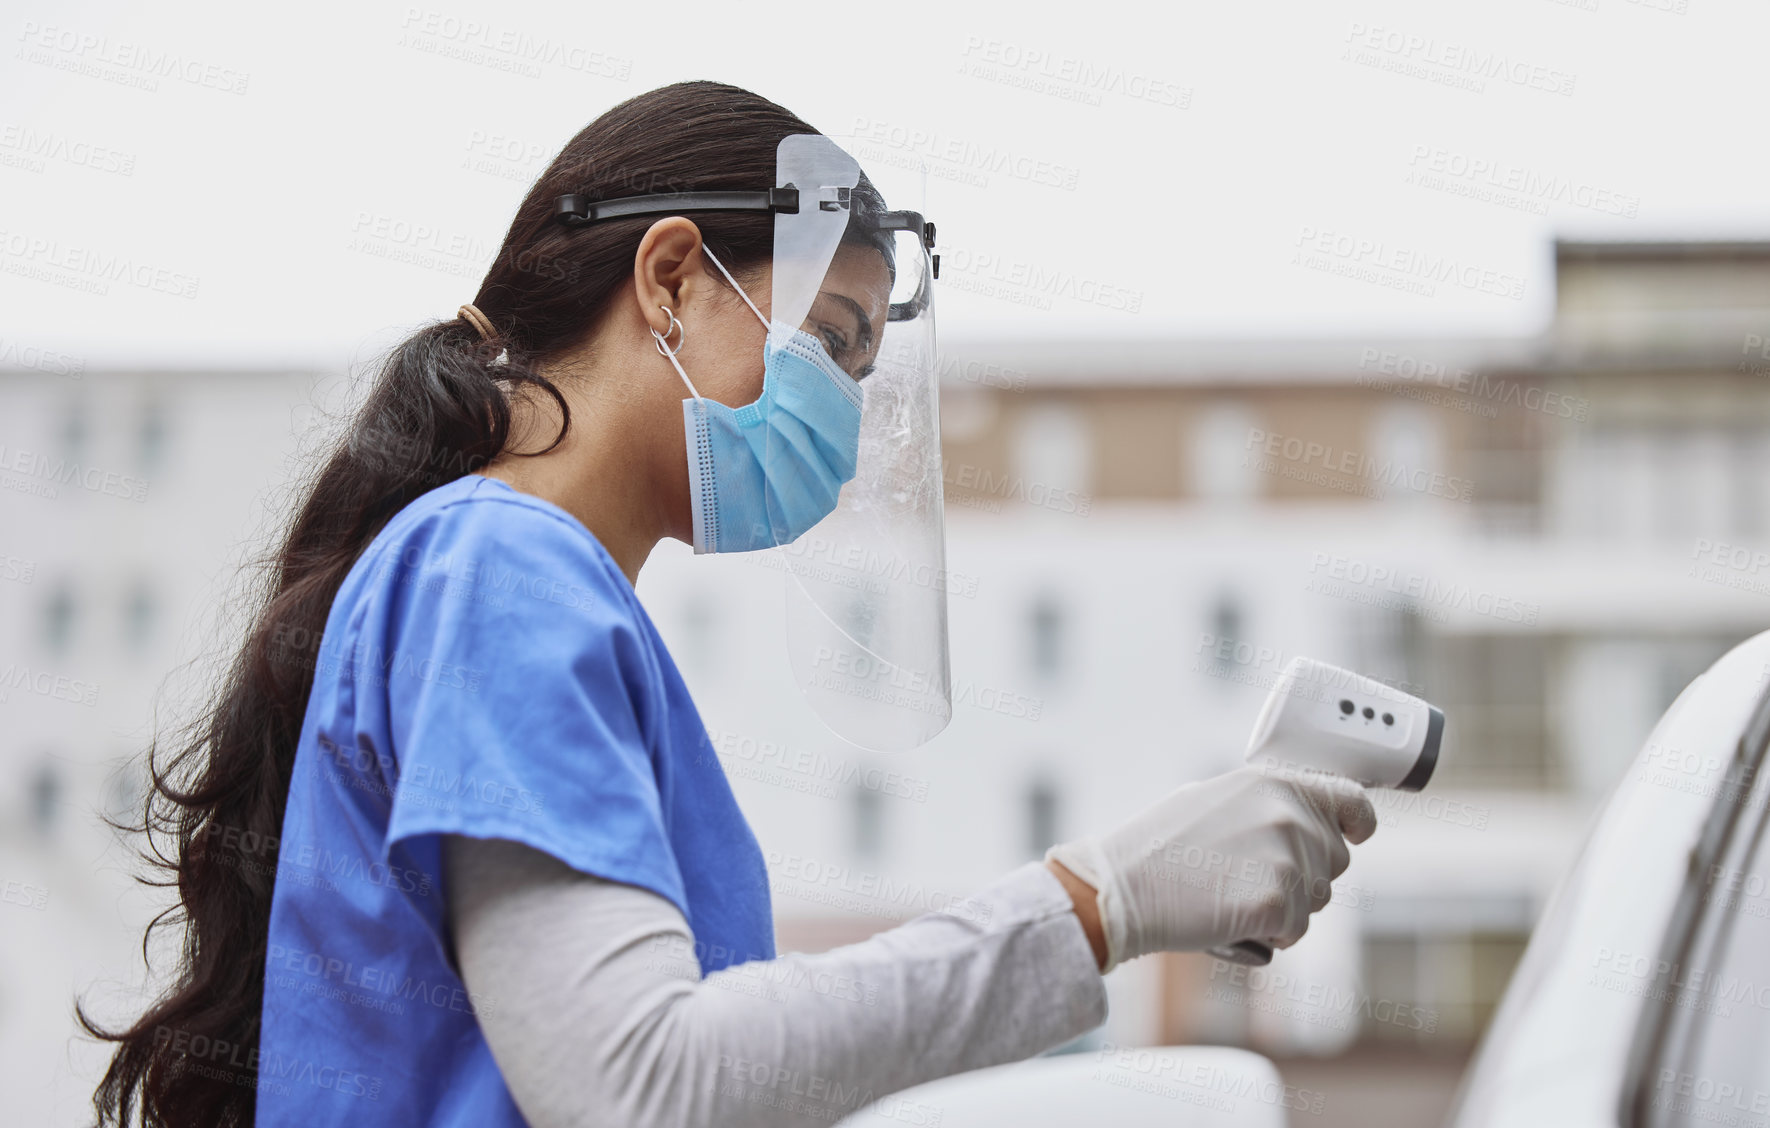 Buy stock photo Shot of a young healthcare worker taking a patient's temperature at a drive through vaccination site